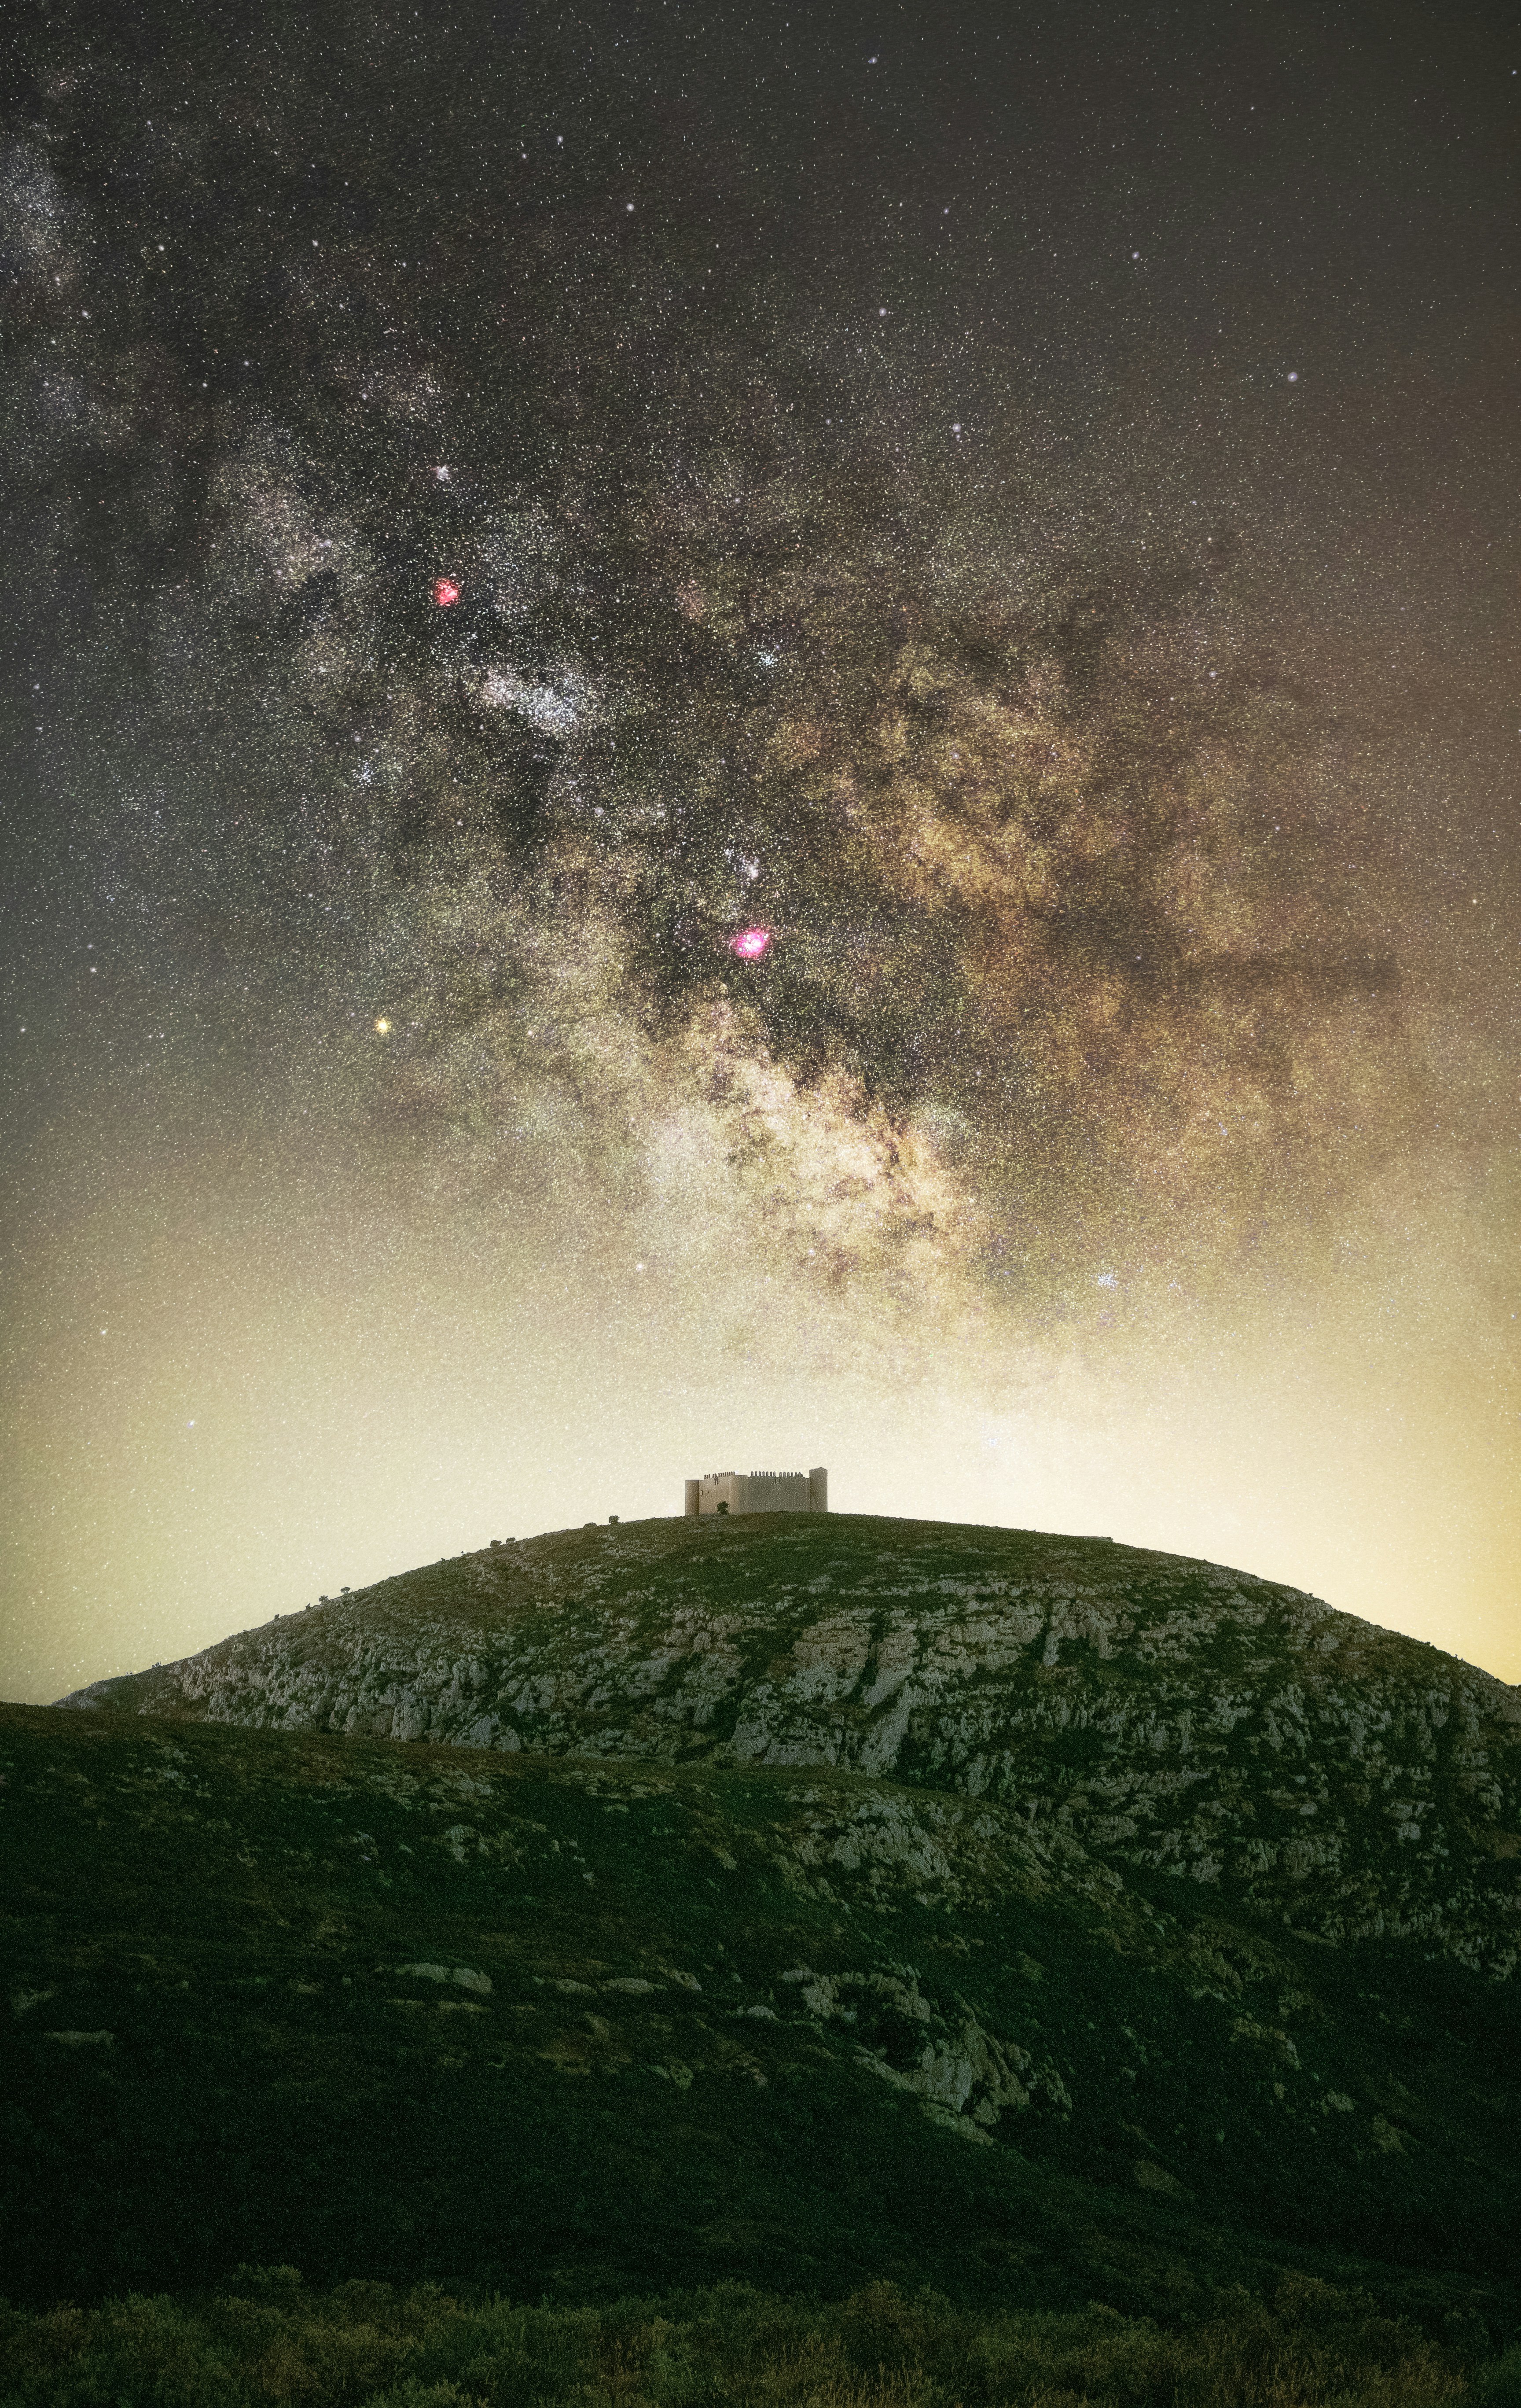 Milky Way over Torroella de Montgrí Castle. One of my favourites astrophotography photos taken in the 2021 summer with this impressive Miky Way Core rising over one of the most famous castles of Catalunya.